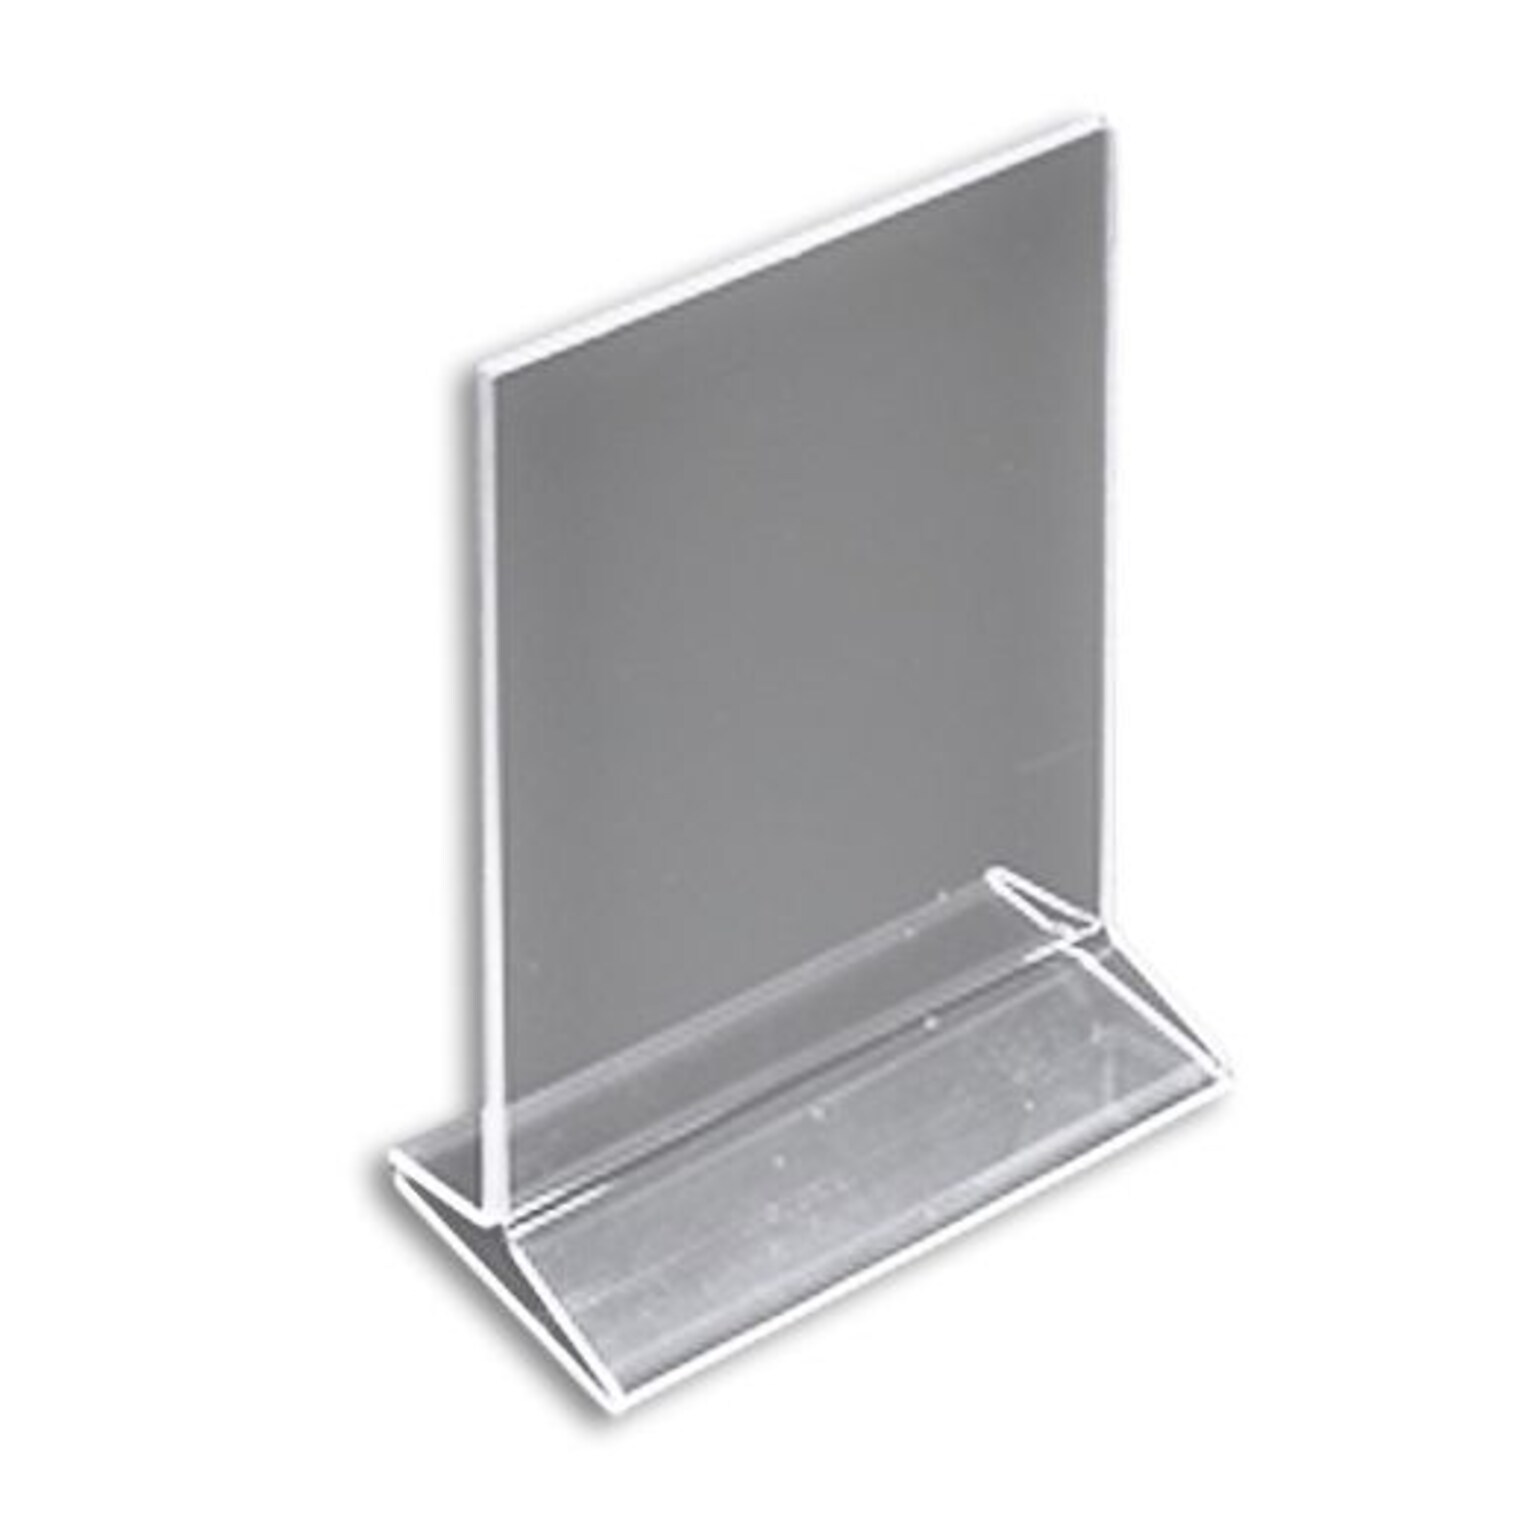 Azar Displays Top Loading Clear Acrylic T-Frame Sign Holder 5.5 Wide x 8.5 High-Vertical, 10-Pack (142711)